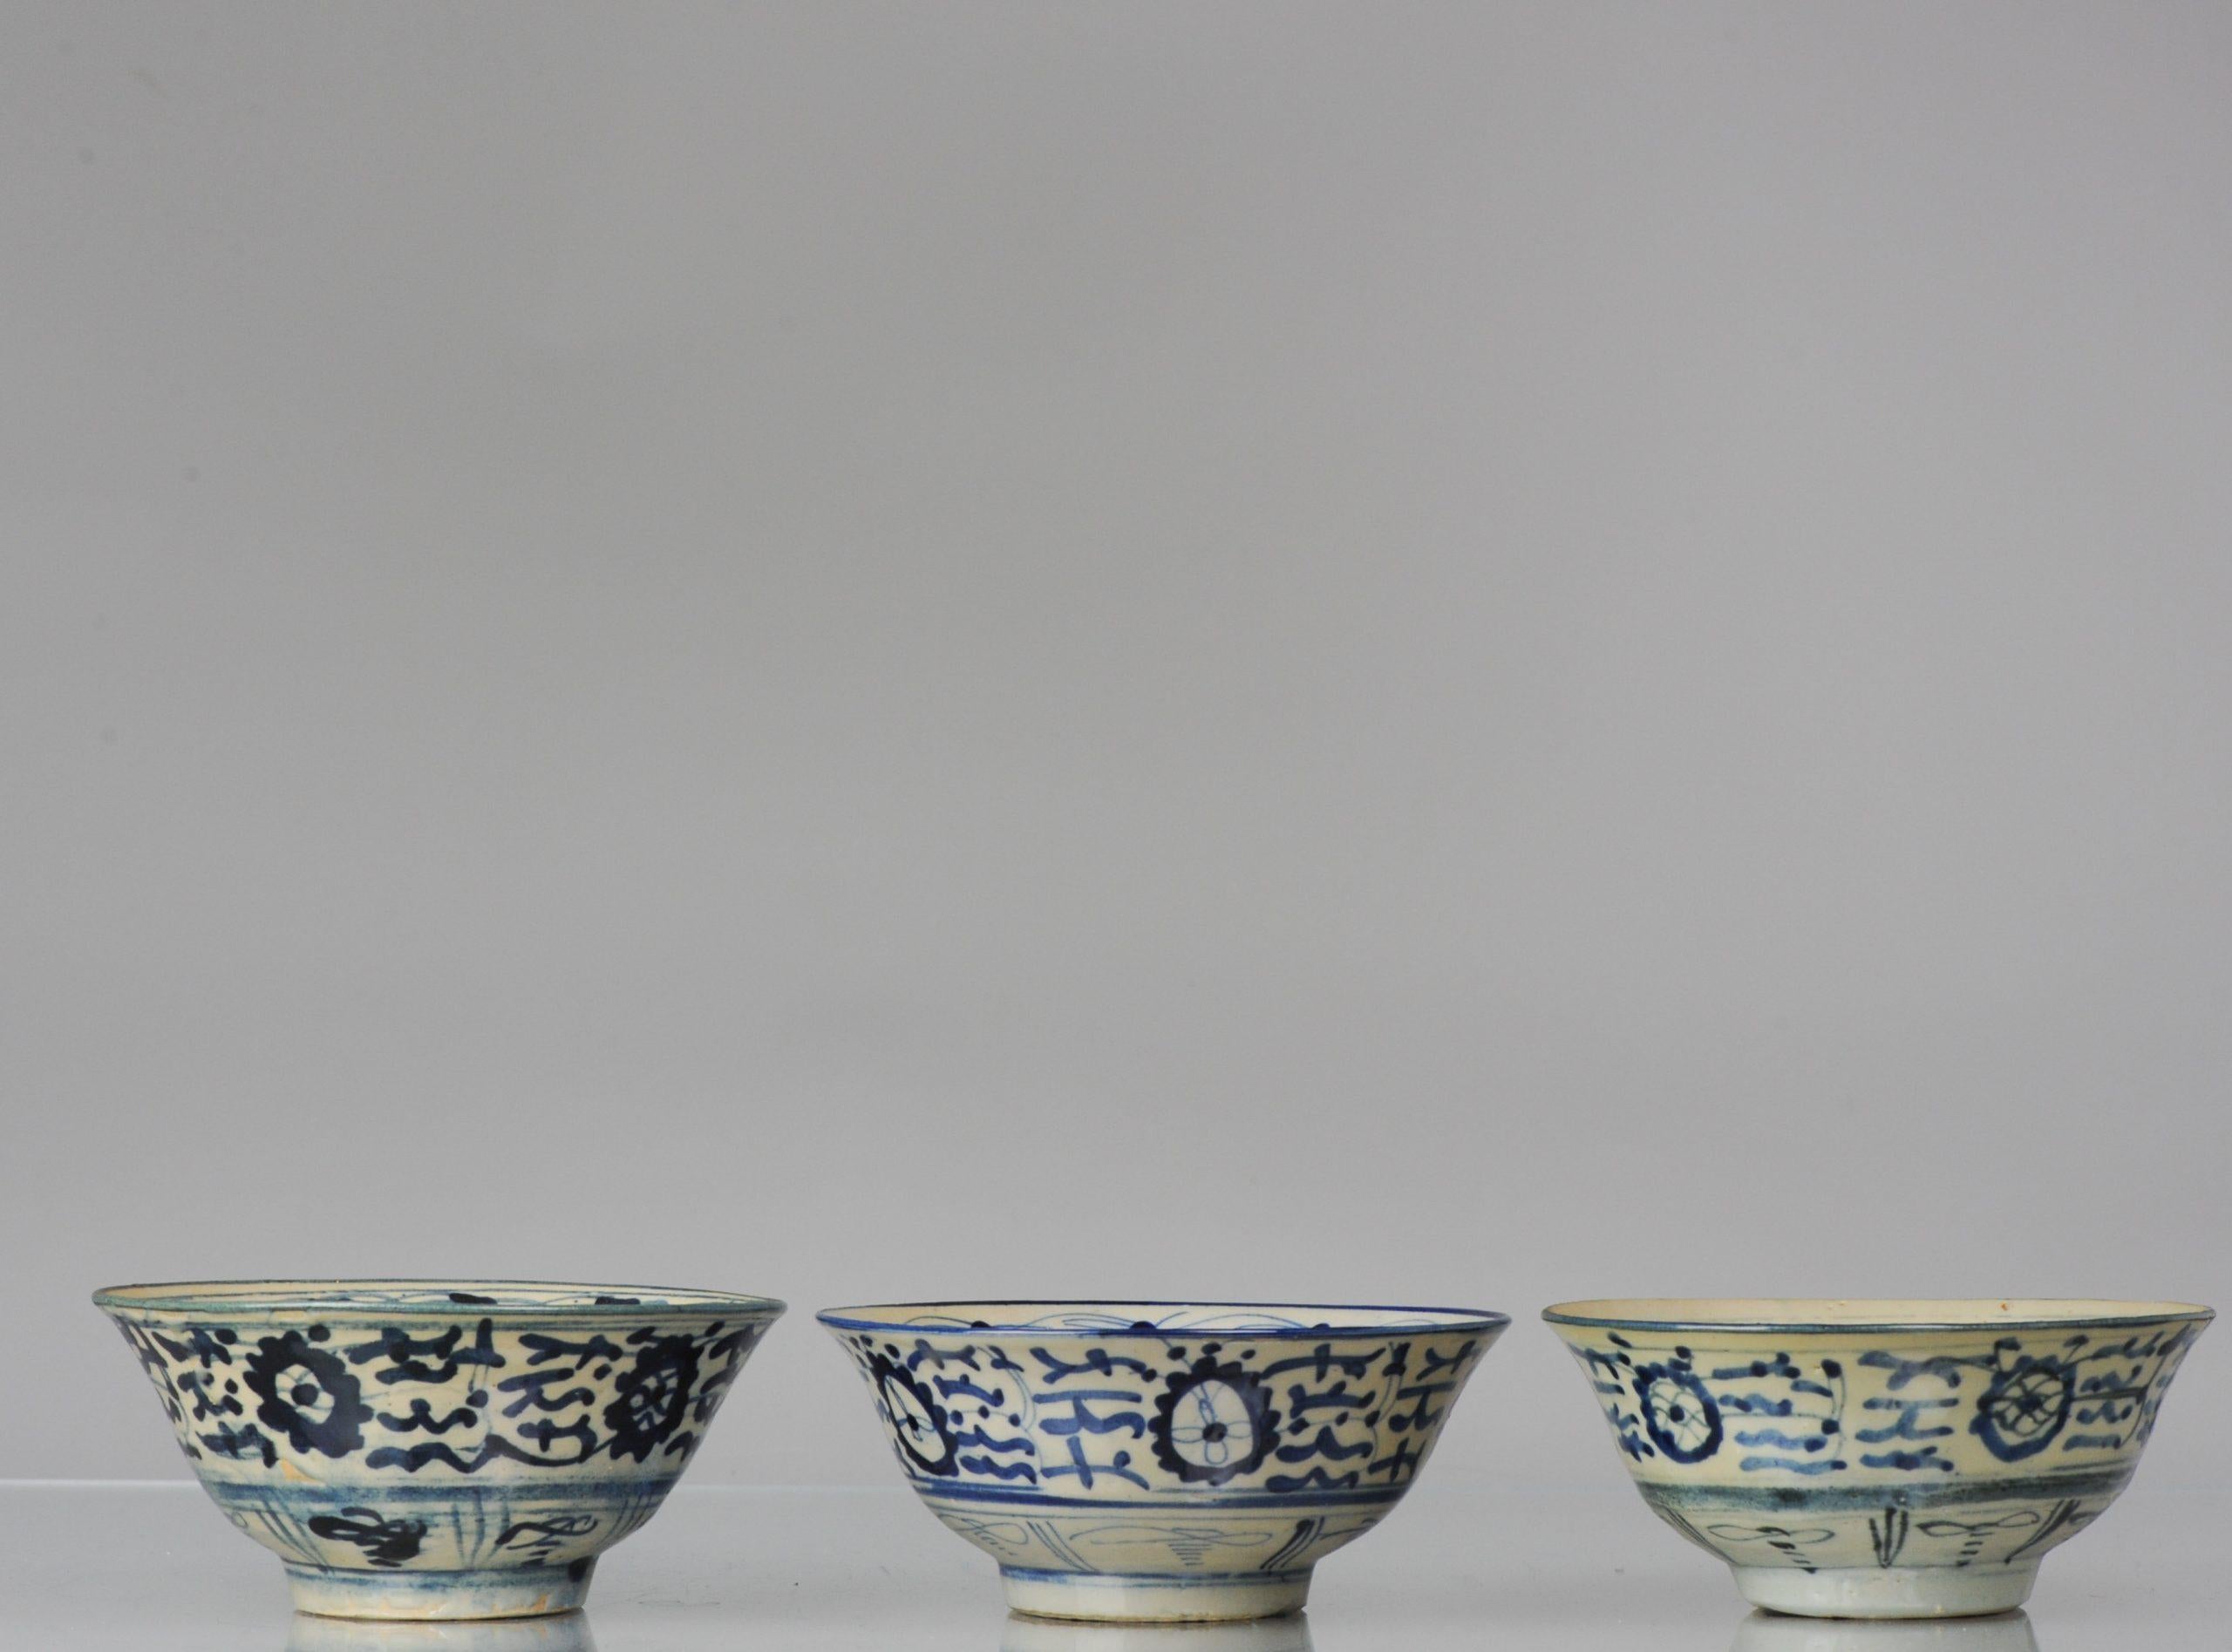 Lovely Chinese set of 3 Kitchen Qing bowls. Marked at base.

Additional information:
Material: Porcelain 
Region of Origin: China
Period: 19th century Qing (1661 - 1912)
Condition: Overall Condition All perfect.
Dimension: Ø 16.3 x 7 H cm